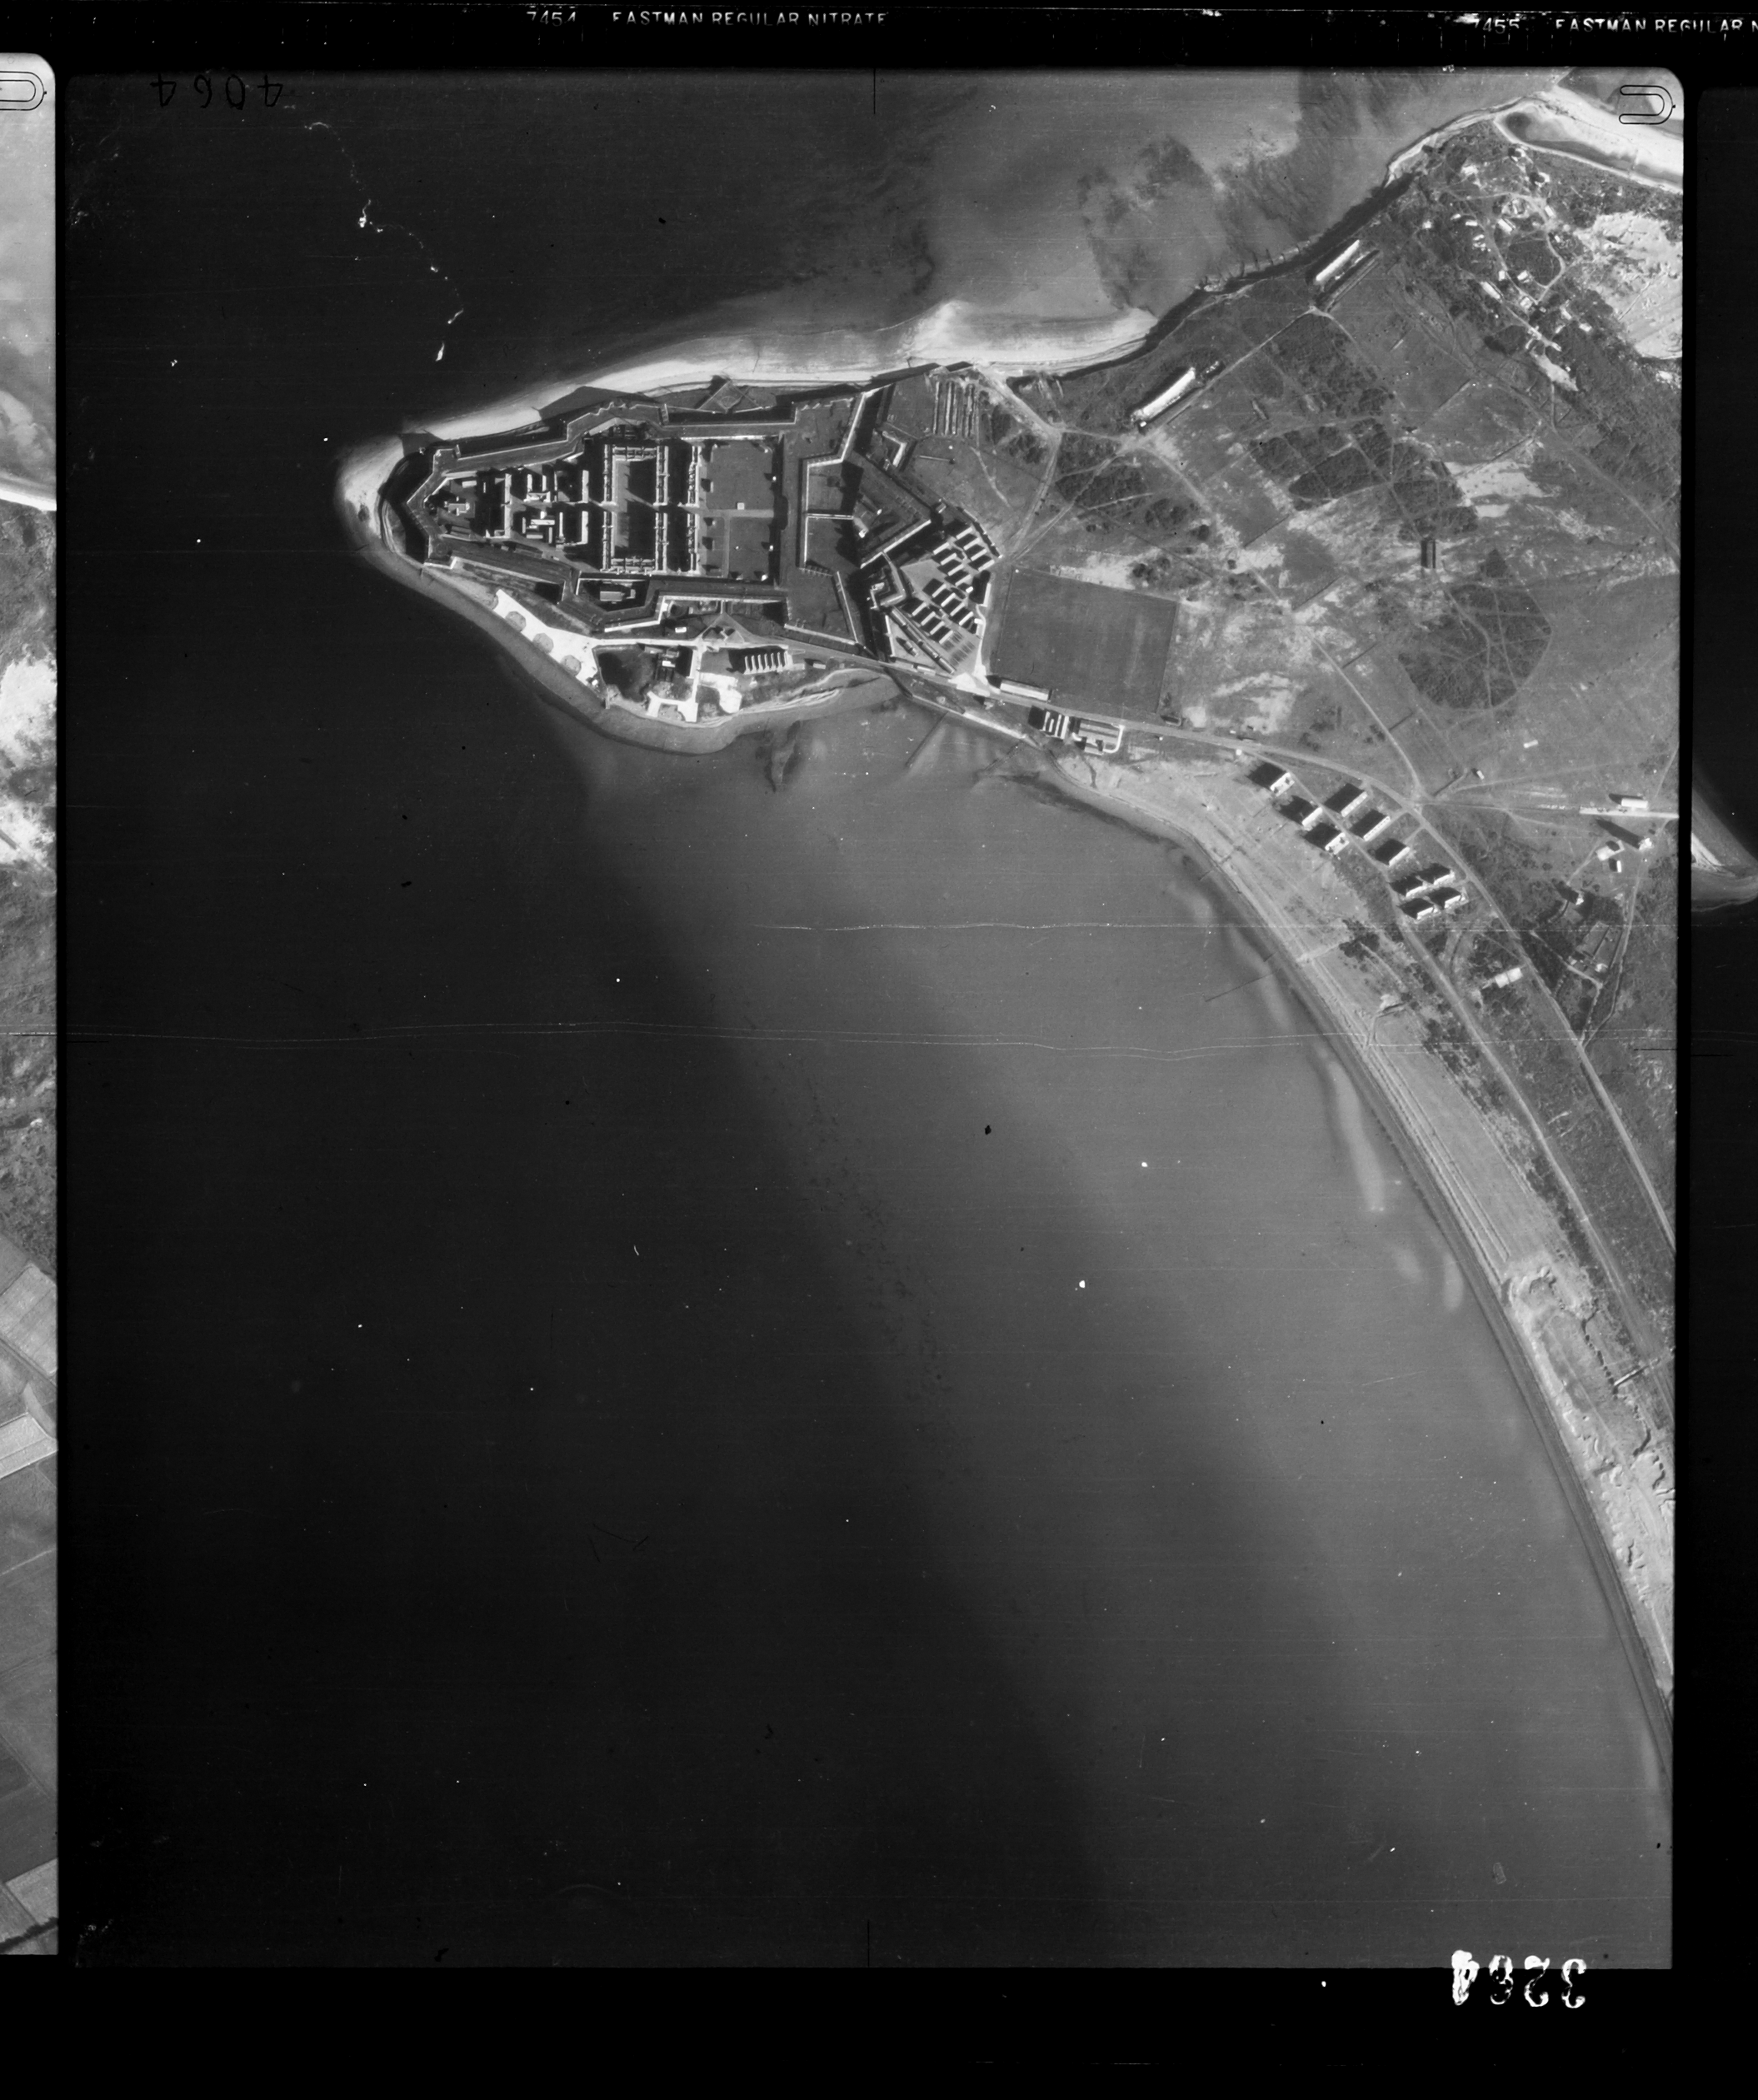 Aerial photograph of Fort George, taken in 1946. Fort George has been in continual use by the British Army since the 18th century and served as a base depot during the First and Second World Wars.